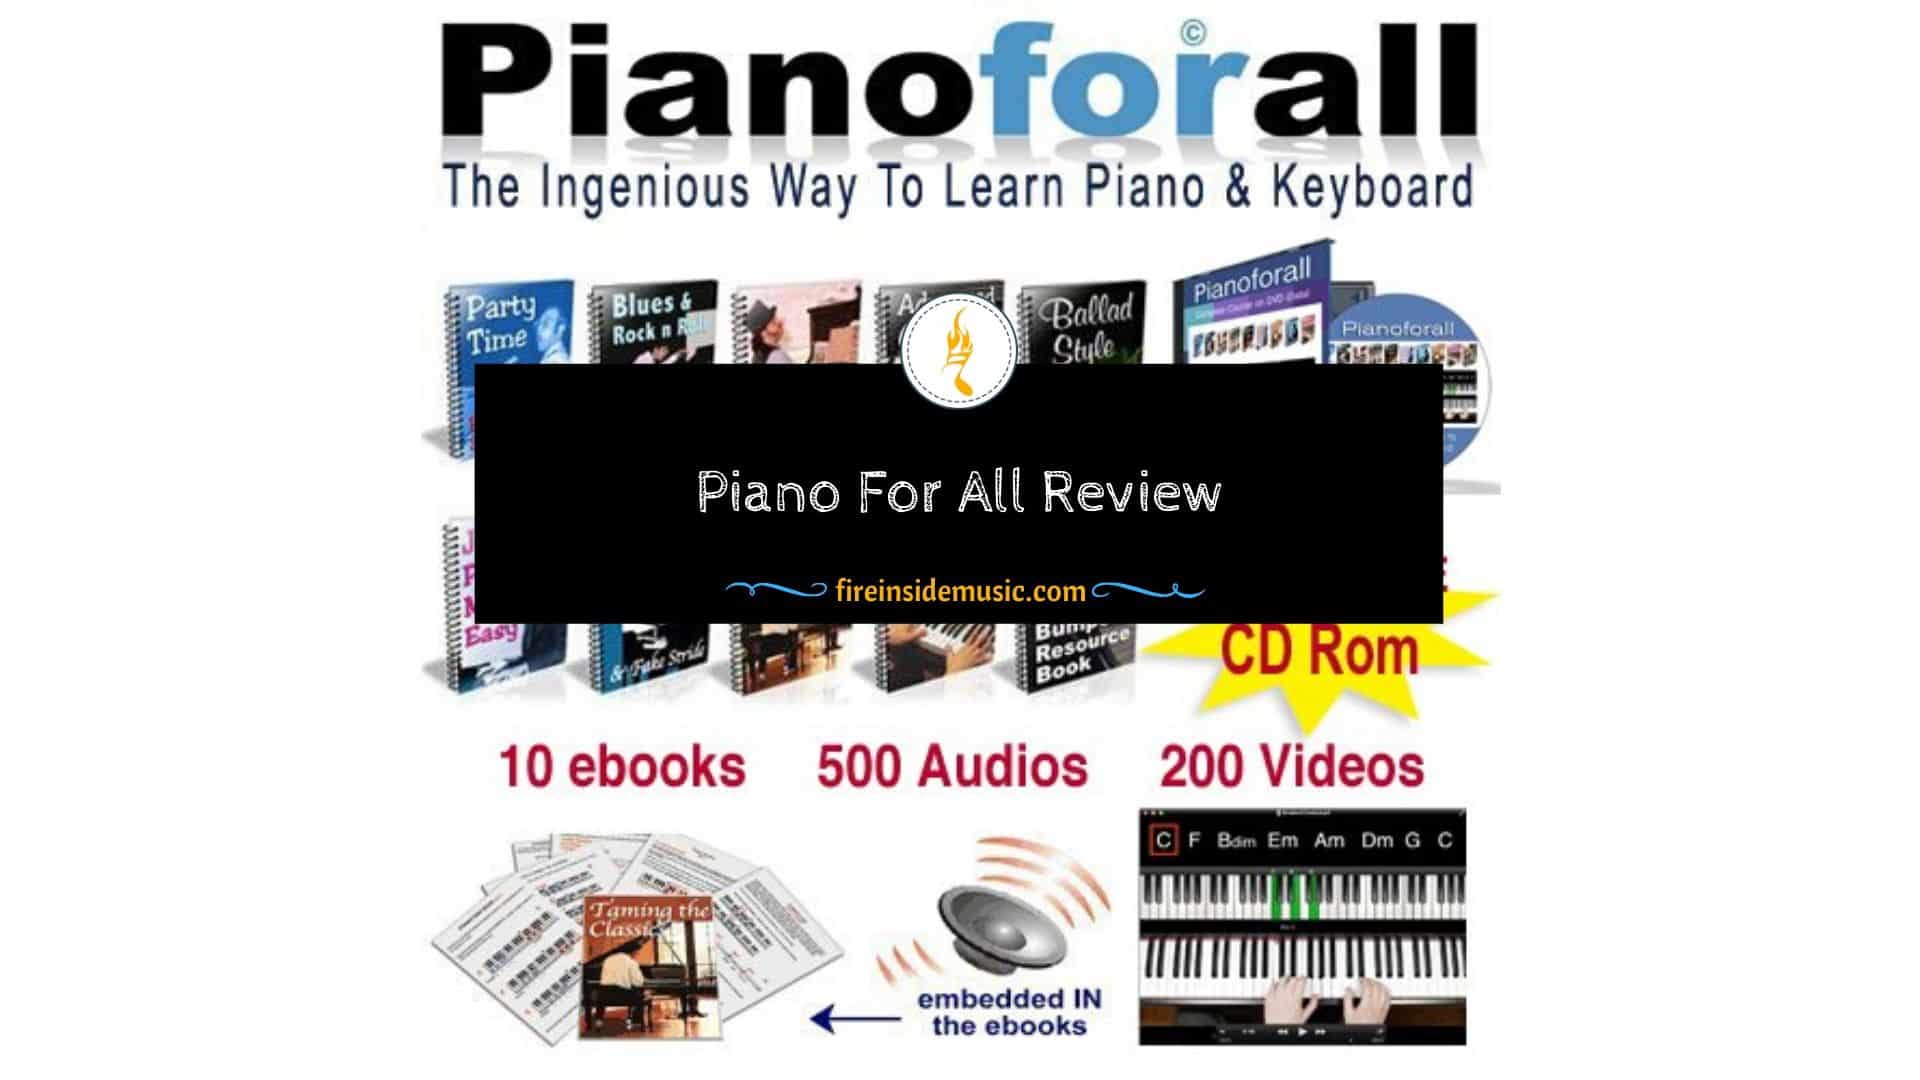 PianoforAll Review: What’s Inside One of The Most Popular Course